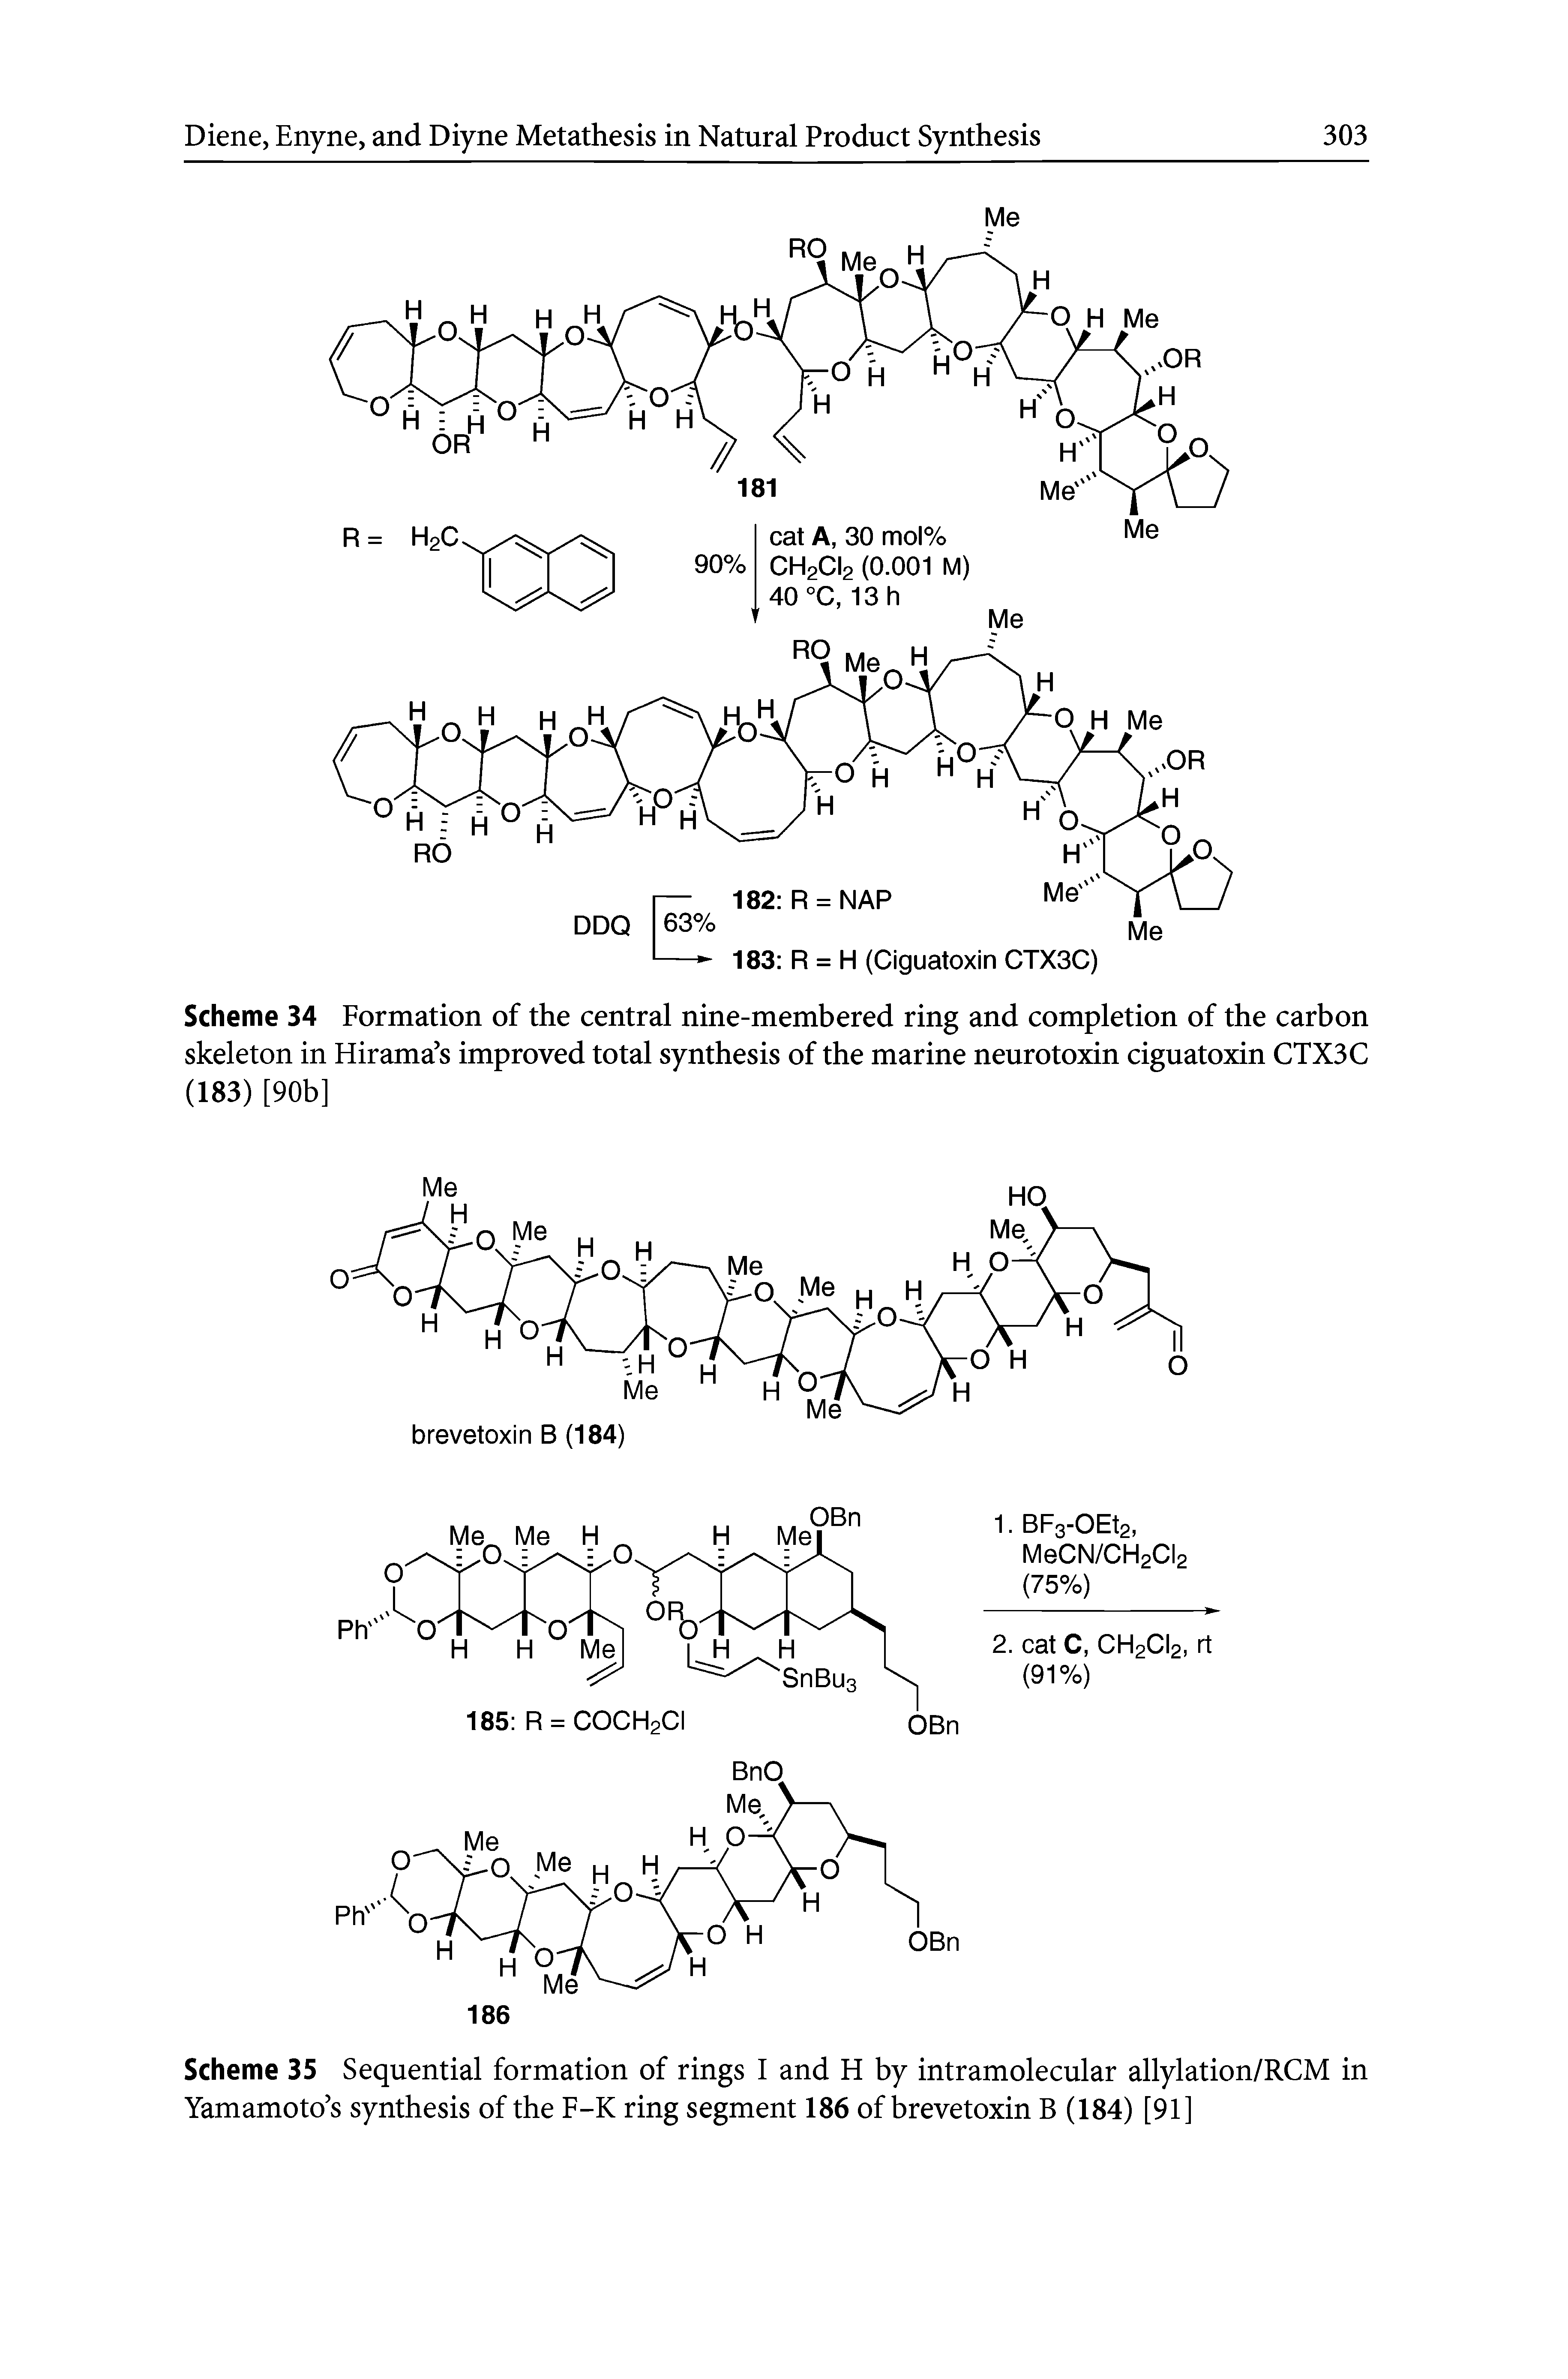 Scheme 35 Sequential formation of rings I and H by intramolecular allylation/RCM in Yamamoto s synthesis of the F-K ring segment 186 of brevetoxin B (184) [91]...